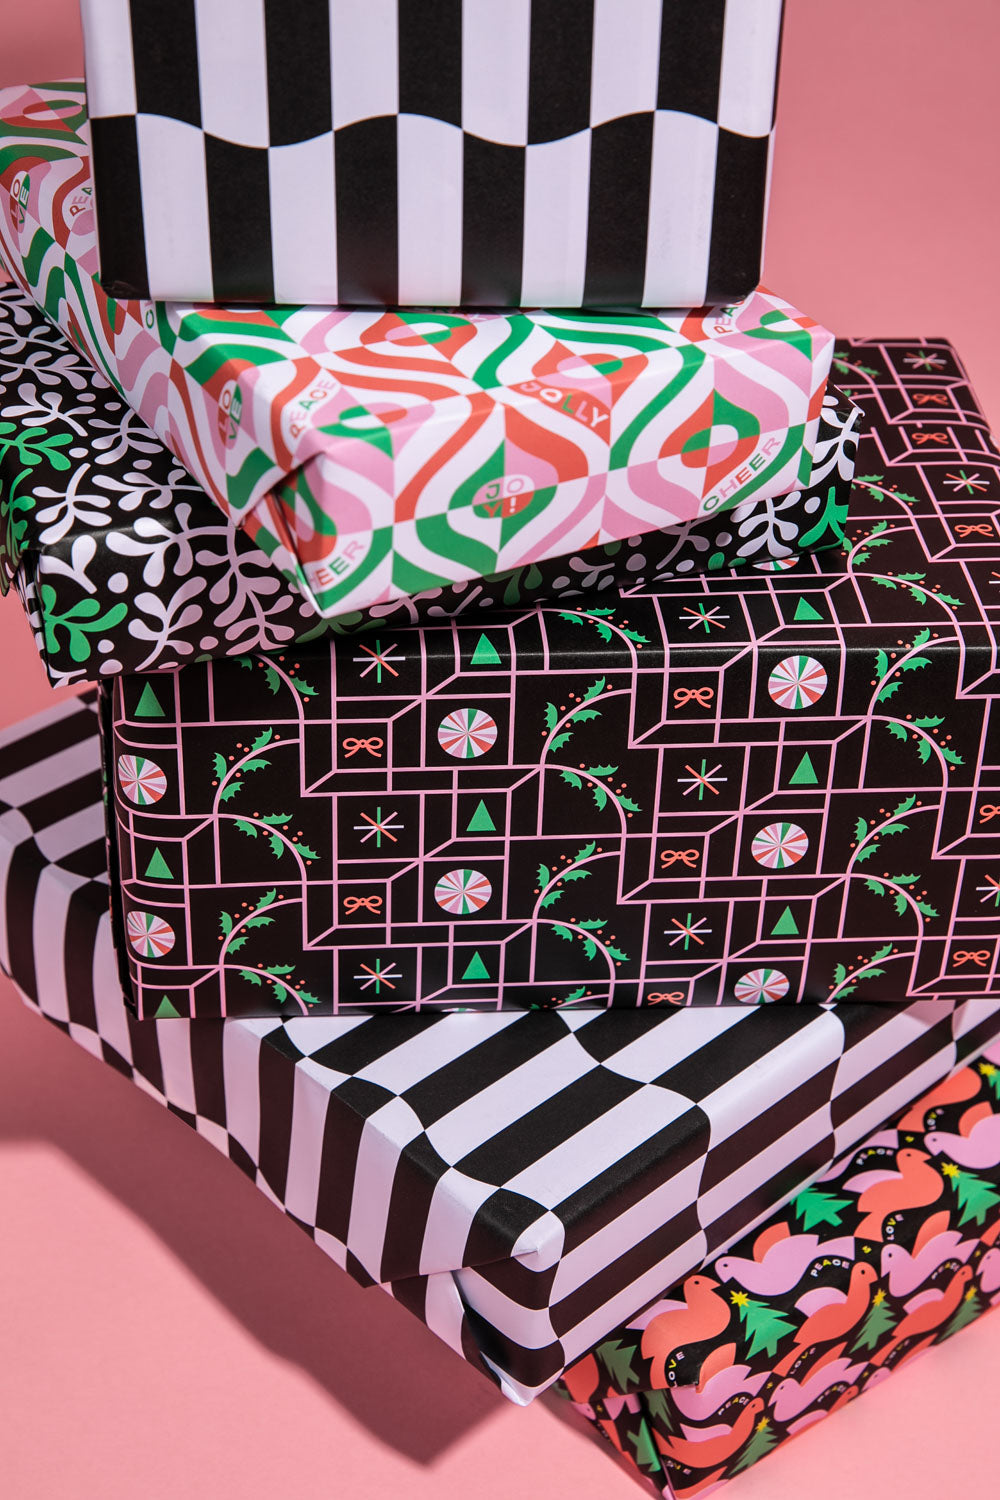 Stacks of presents wrapped in retro abstract wrap, wavy black and white checkerboard, peace doves, and christmas tree patterns.